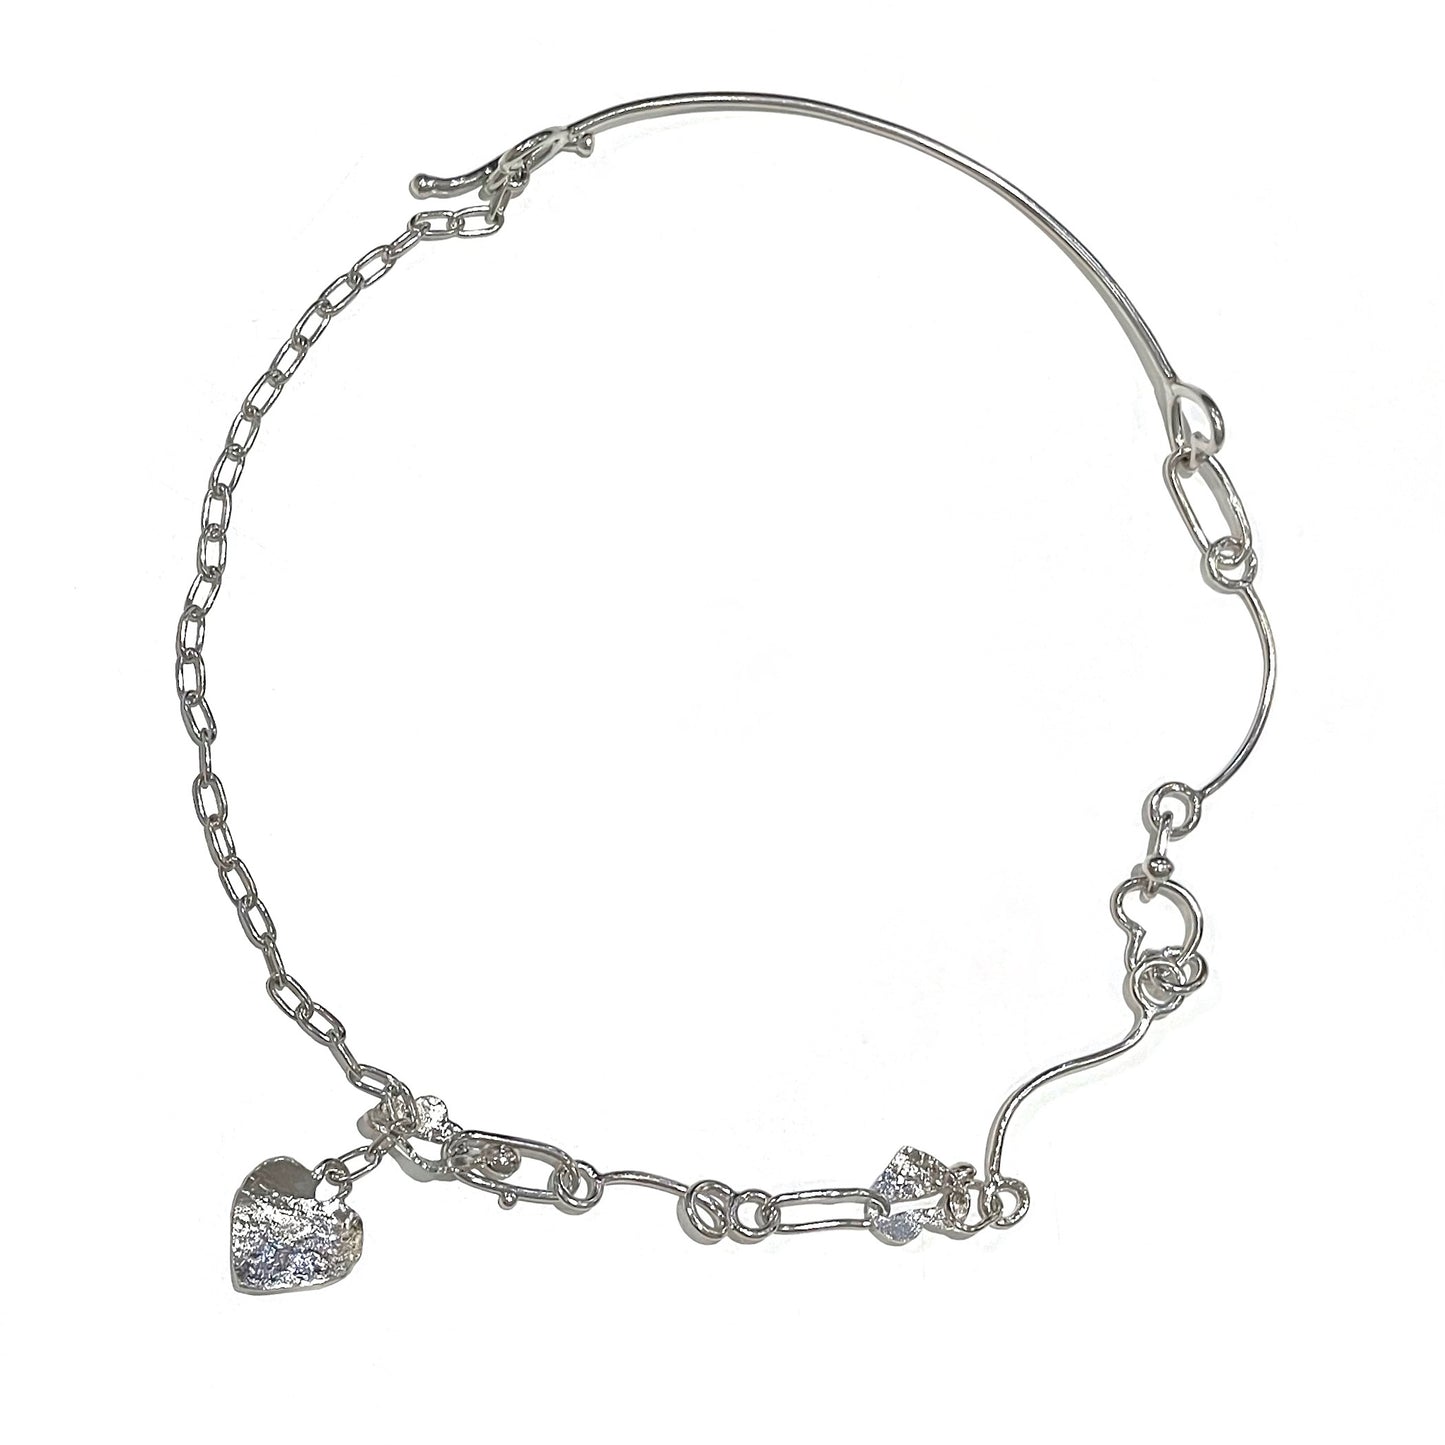 o.watery / heart chain necklace / silver / 型押し